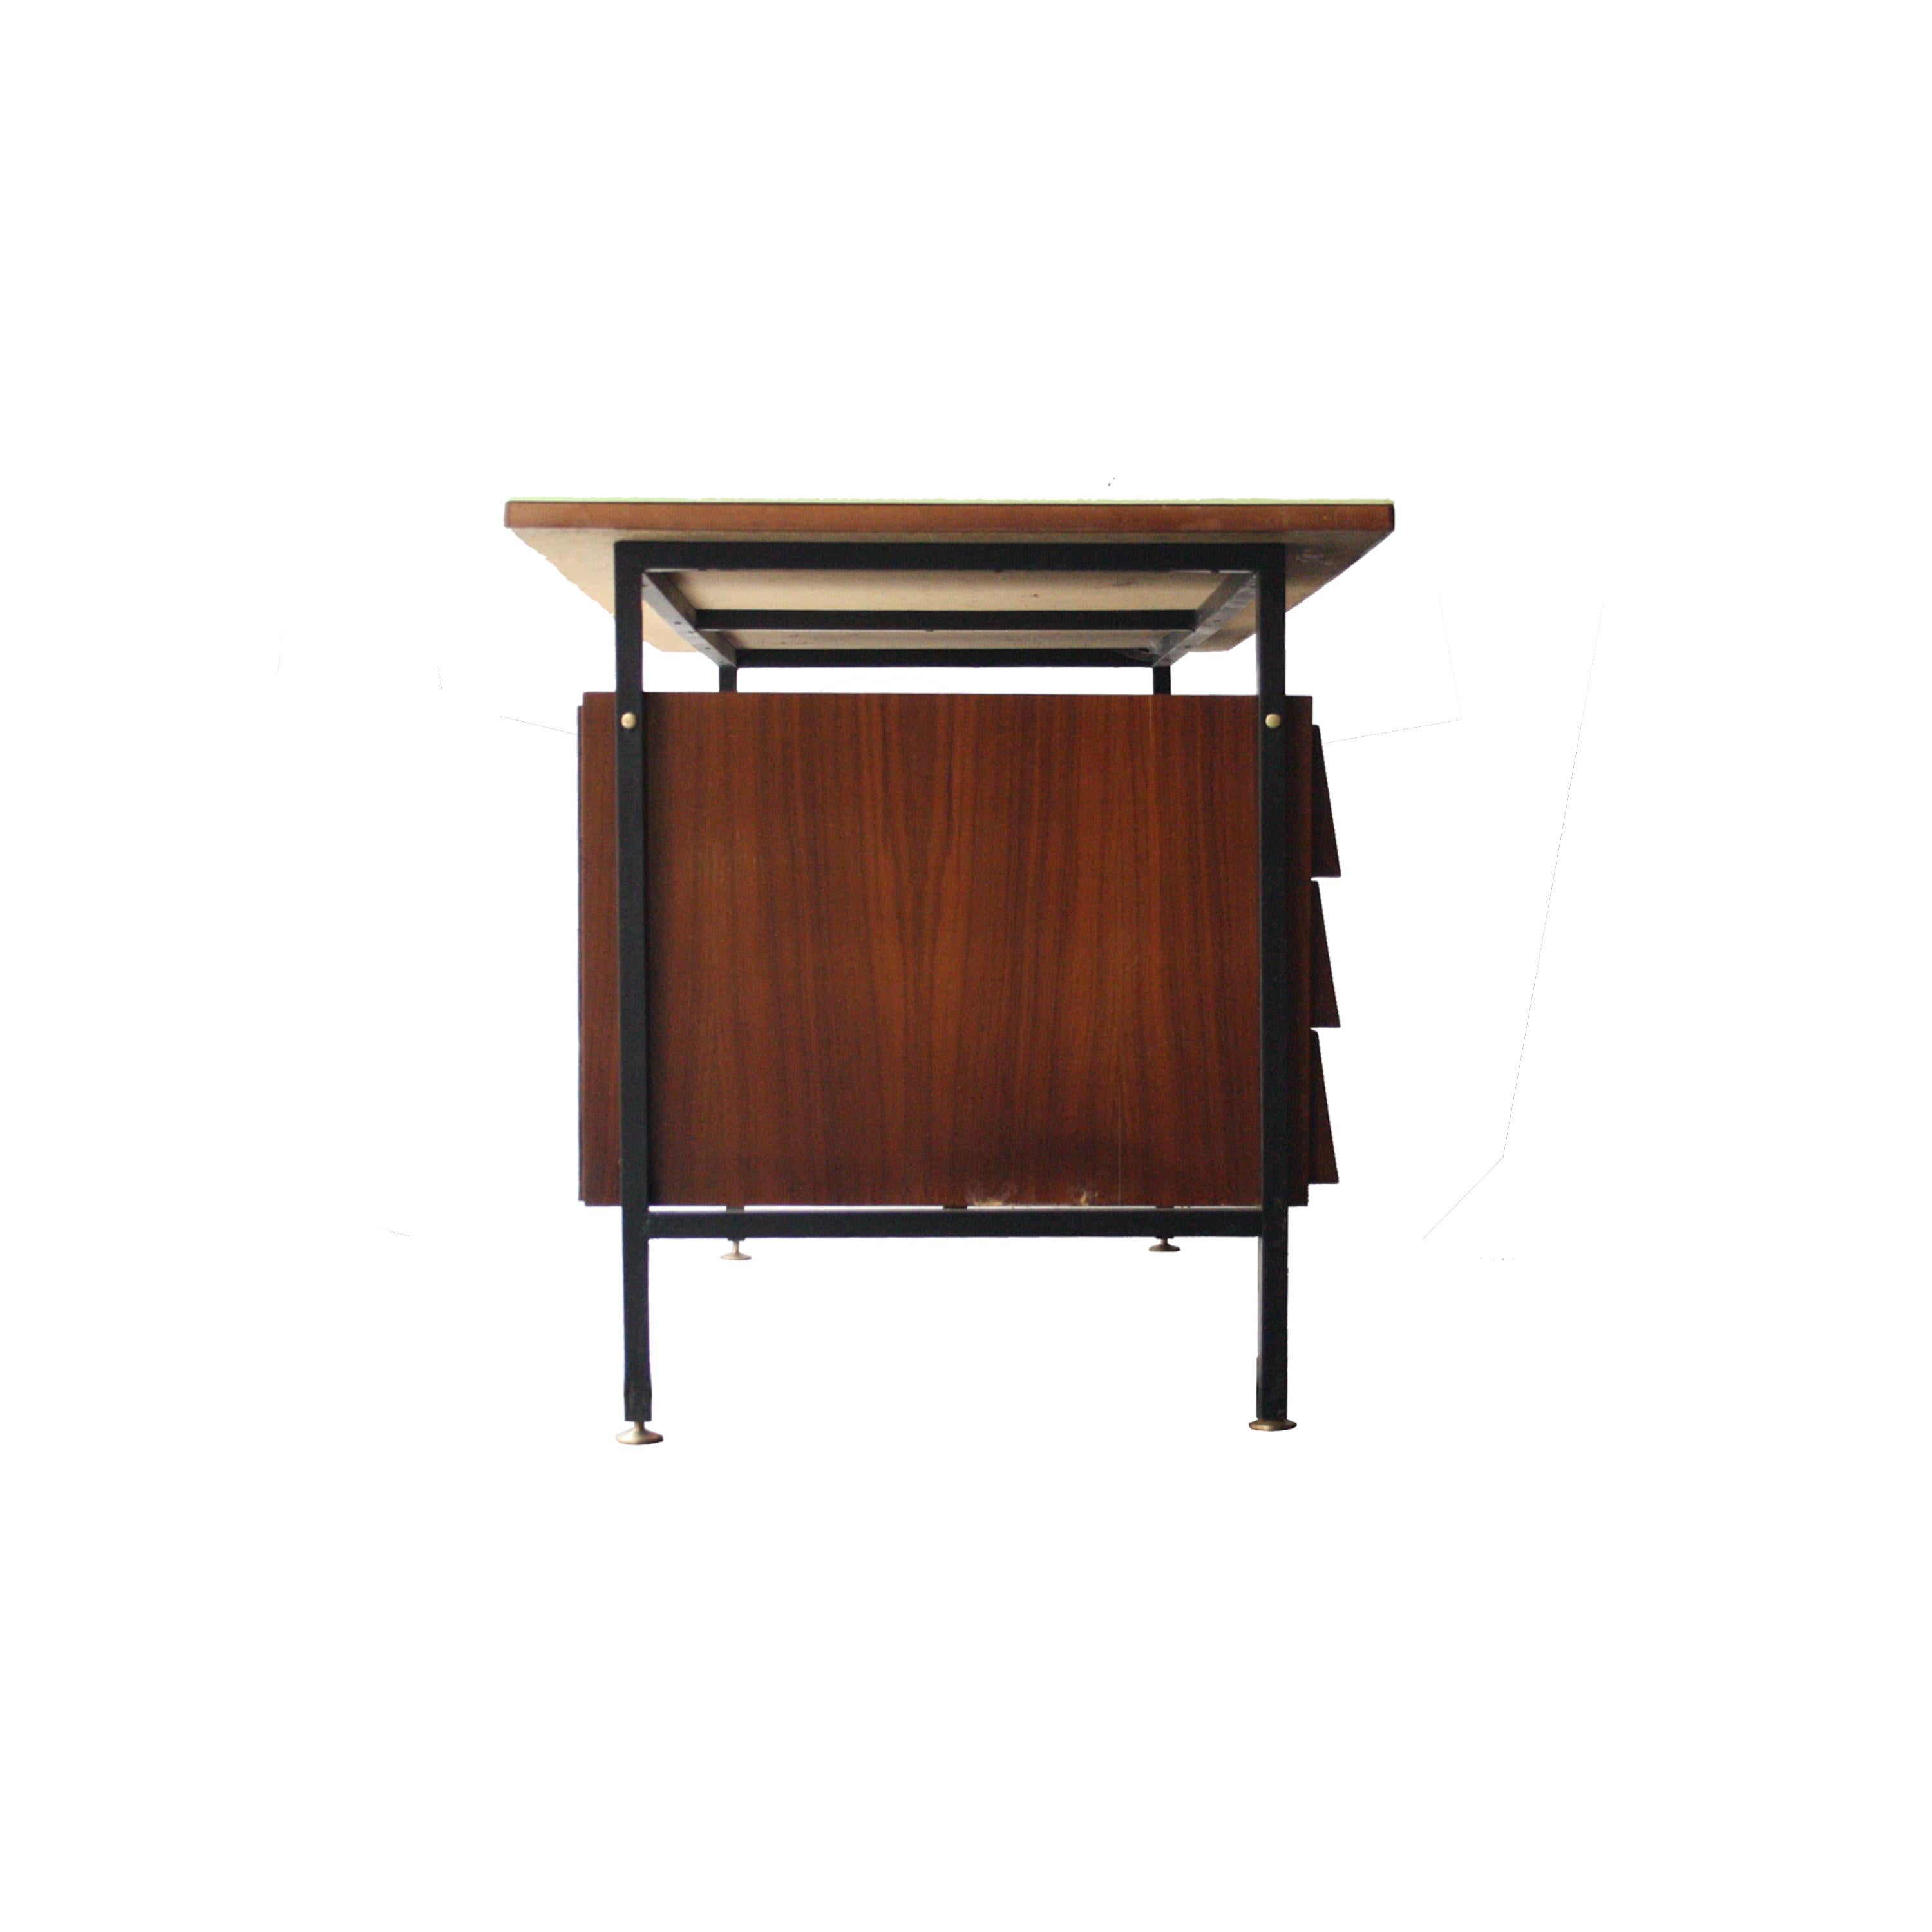 Lacquered Mid-Cantury Modern Rectangular Rosewood Glass Desk Italian, 1960